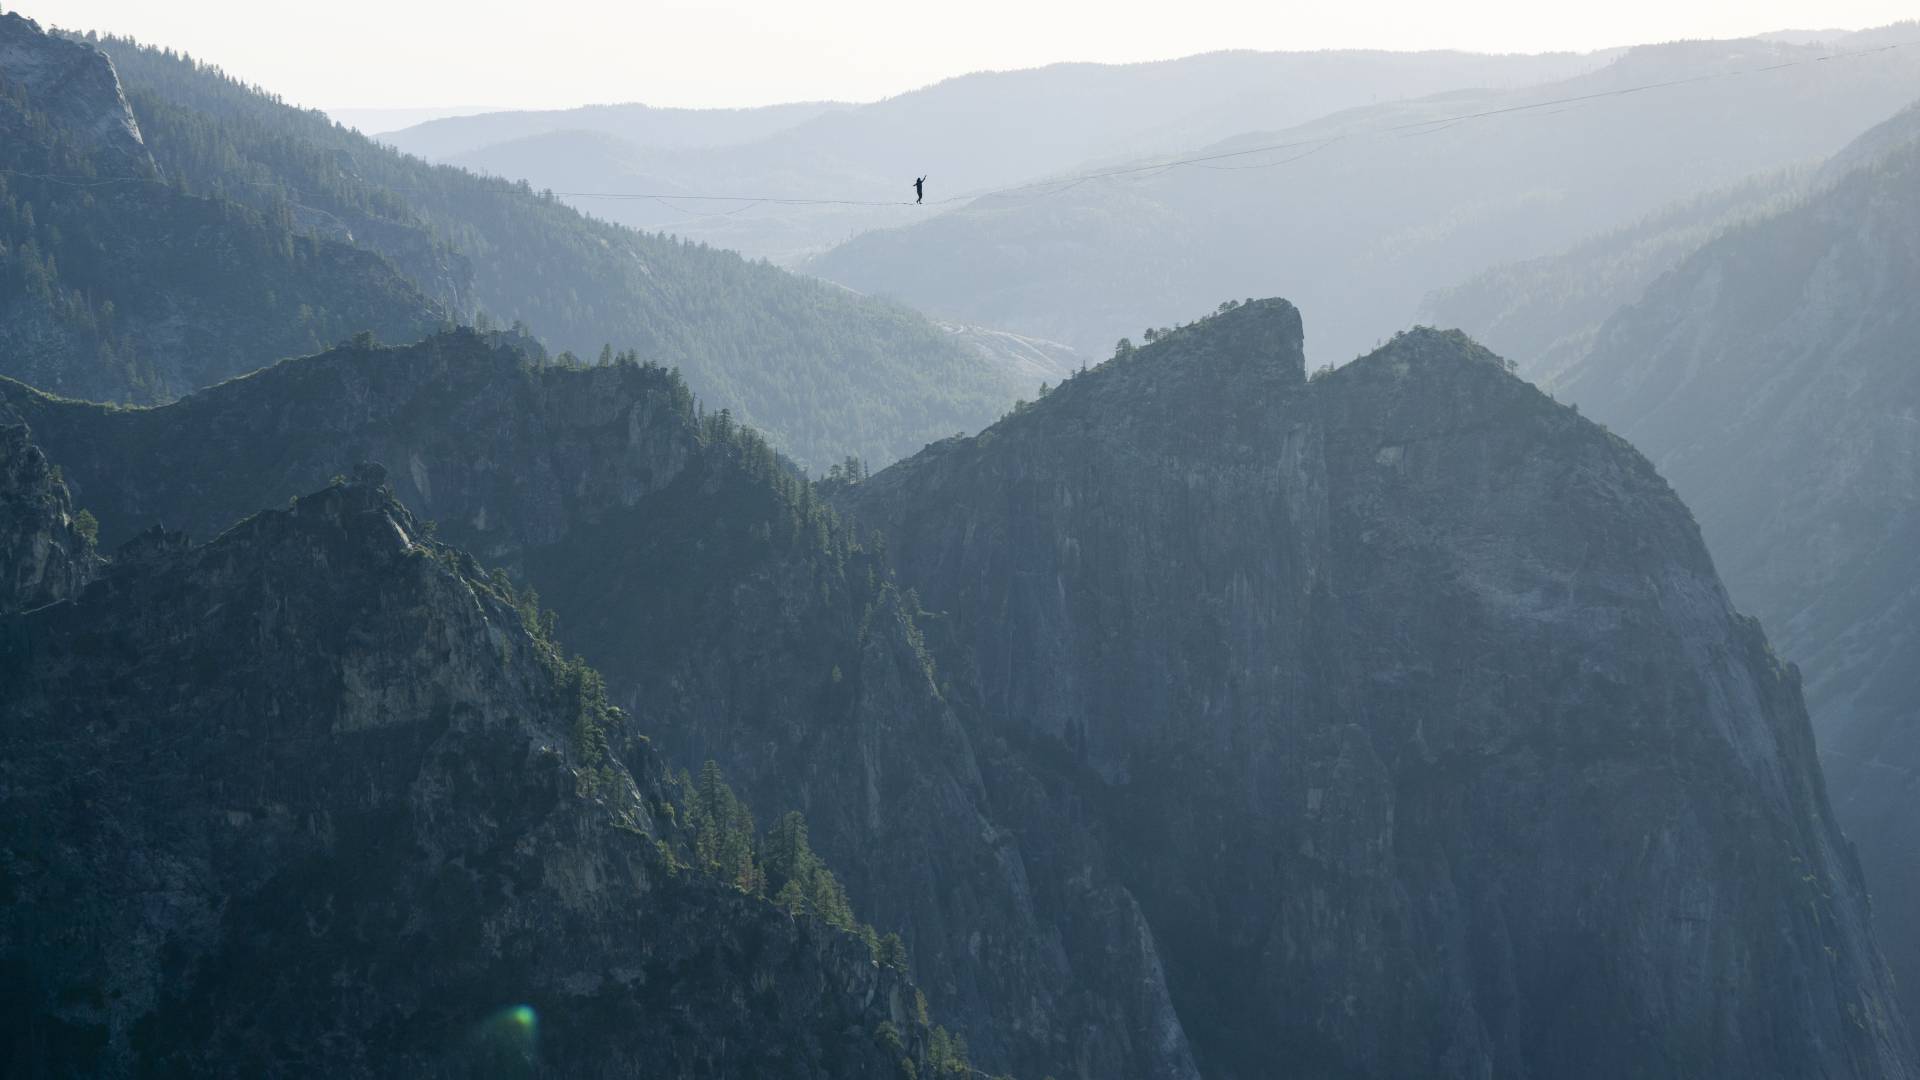 Moises Monterrubio walks a highline 1,600 feet in the air at Yosemite National Park in June. The line stretched 2,800 feet, setting a record in Yosemite and in California, according to the International Slackline Association. Ryan Sheridan/Moises Monterrubio